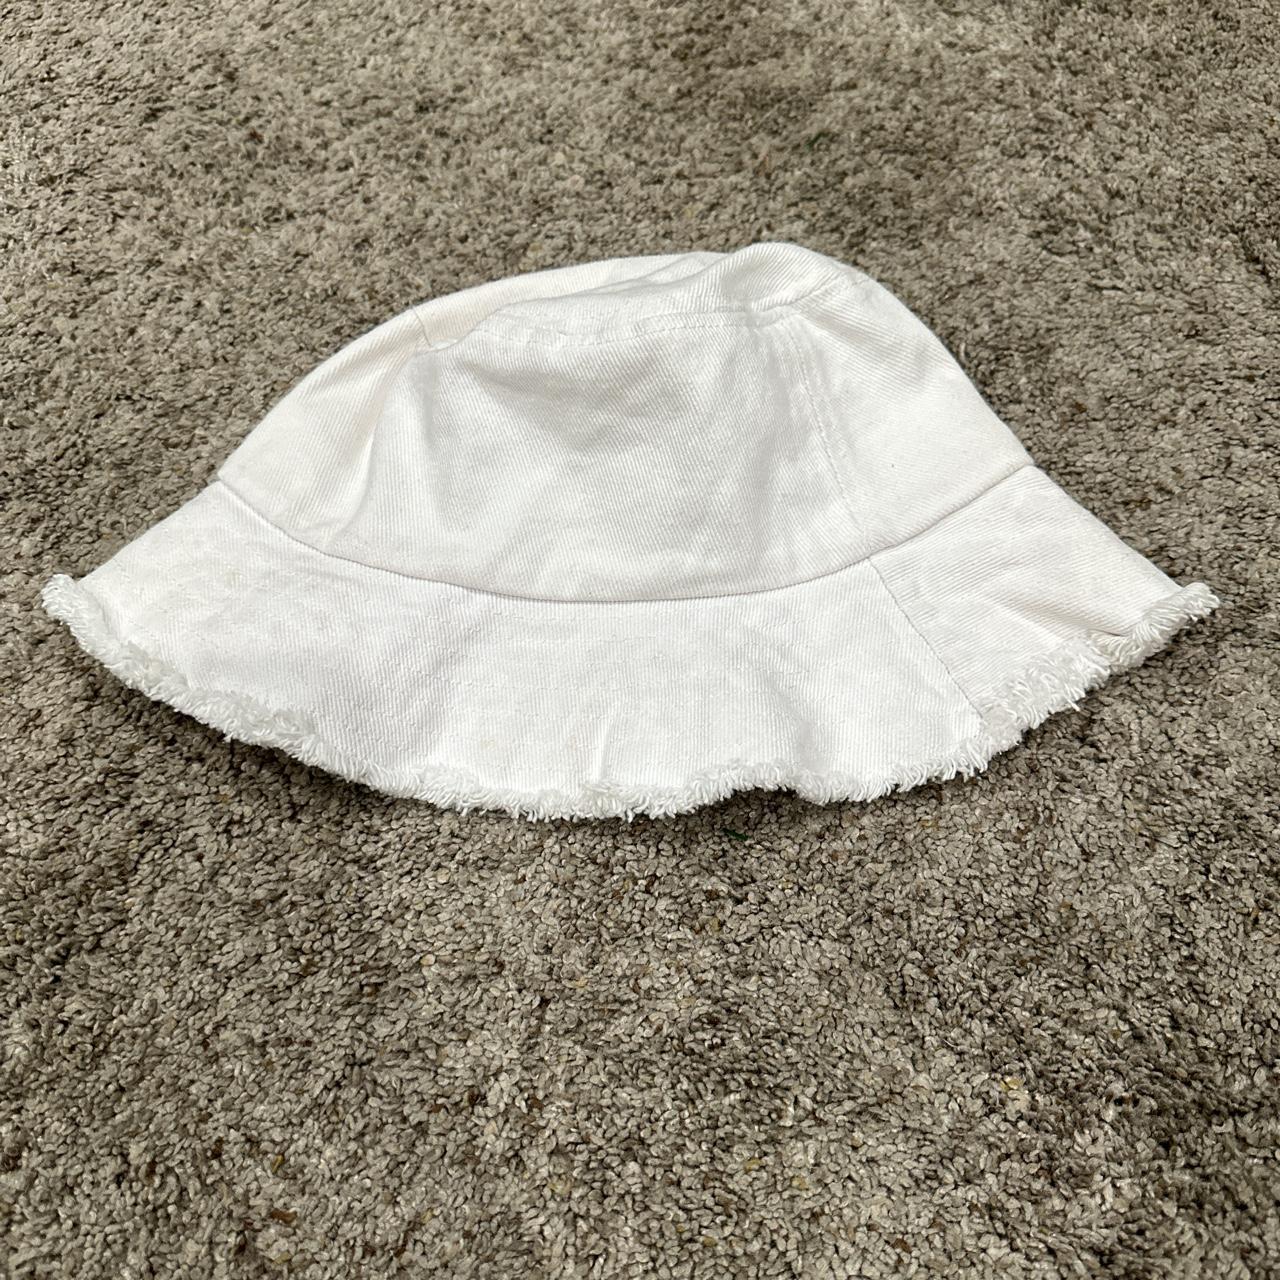 One size fits all bucket hat from tillys. worn - Depop